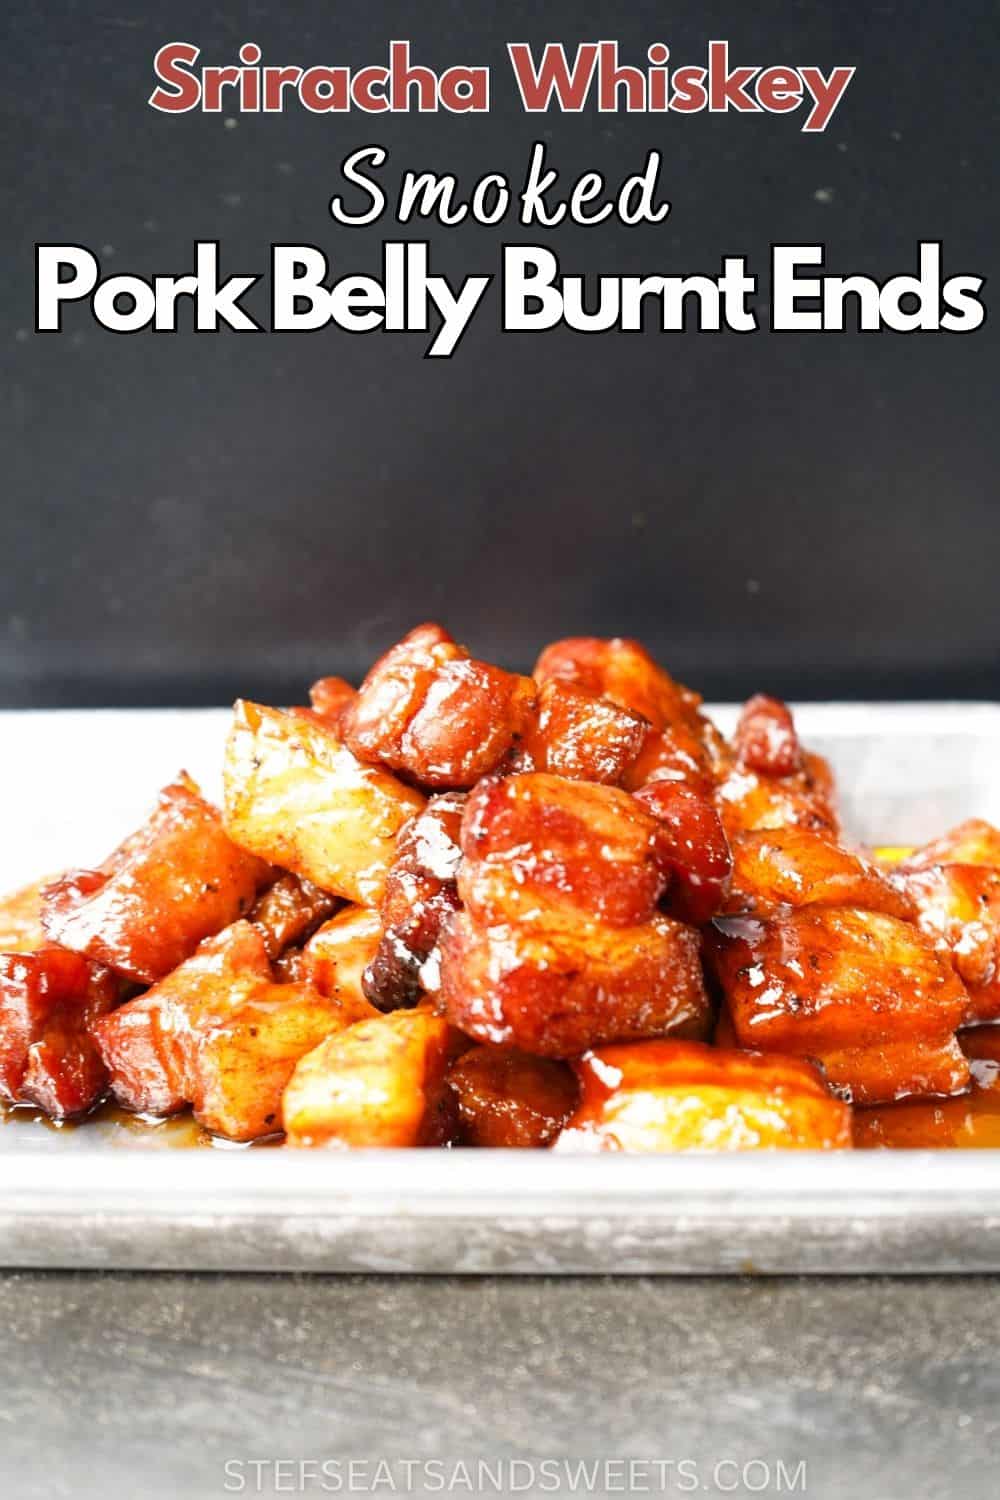 pork belly burnt ends with text